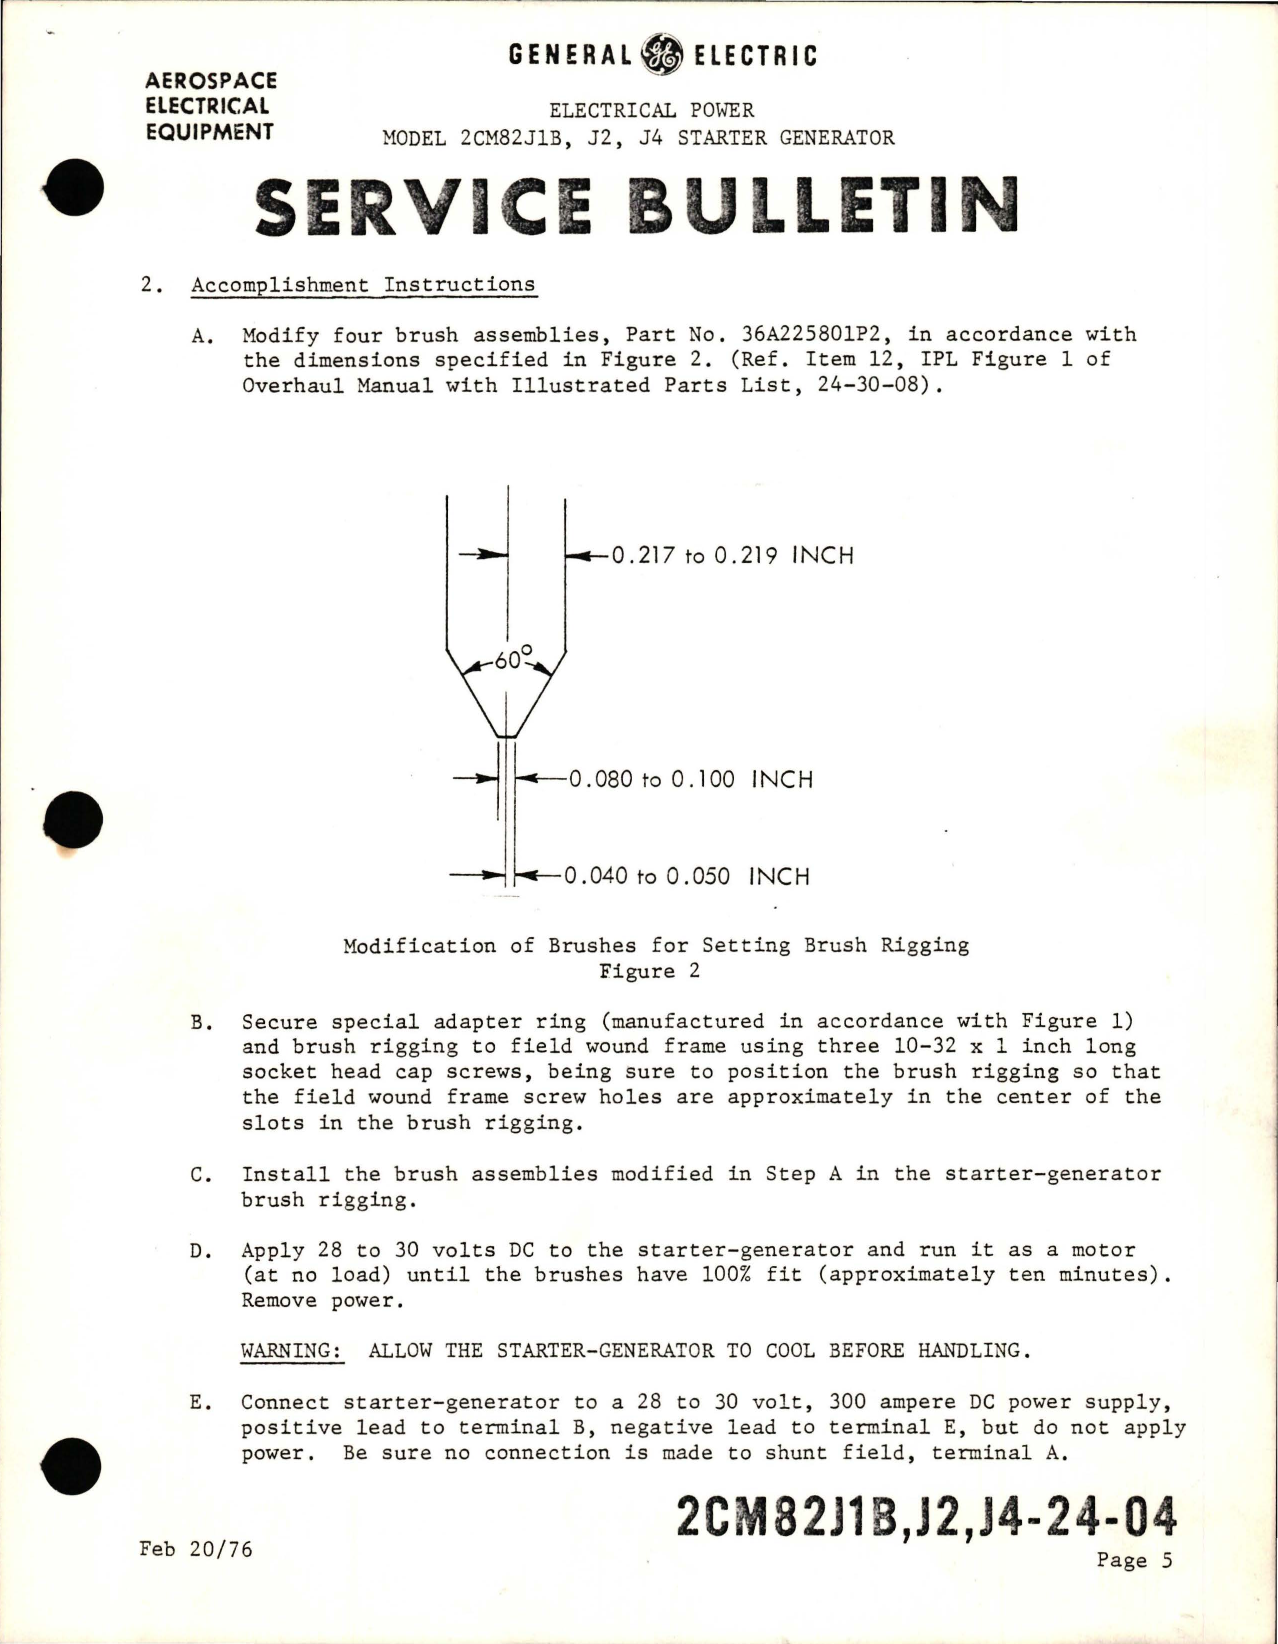 Sample page 5 from AirCorps Library document: Procedures for Setting Brush Rigging on Starter Generator - Model 2CM82J1B, 2CM82J2, and 2CM82J4 